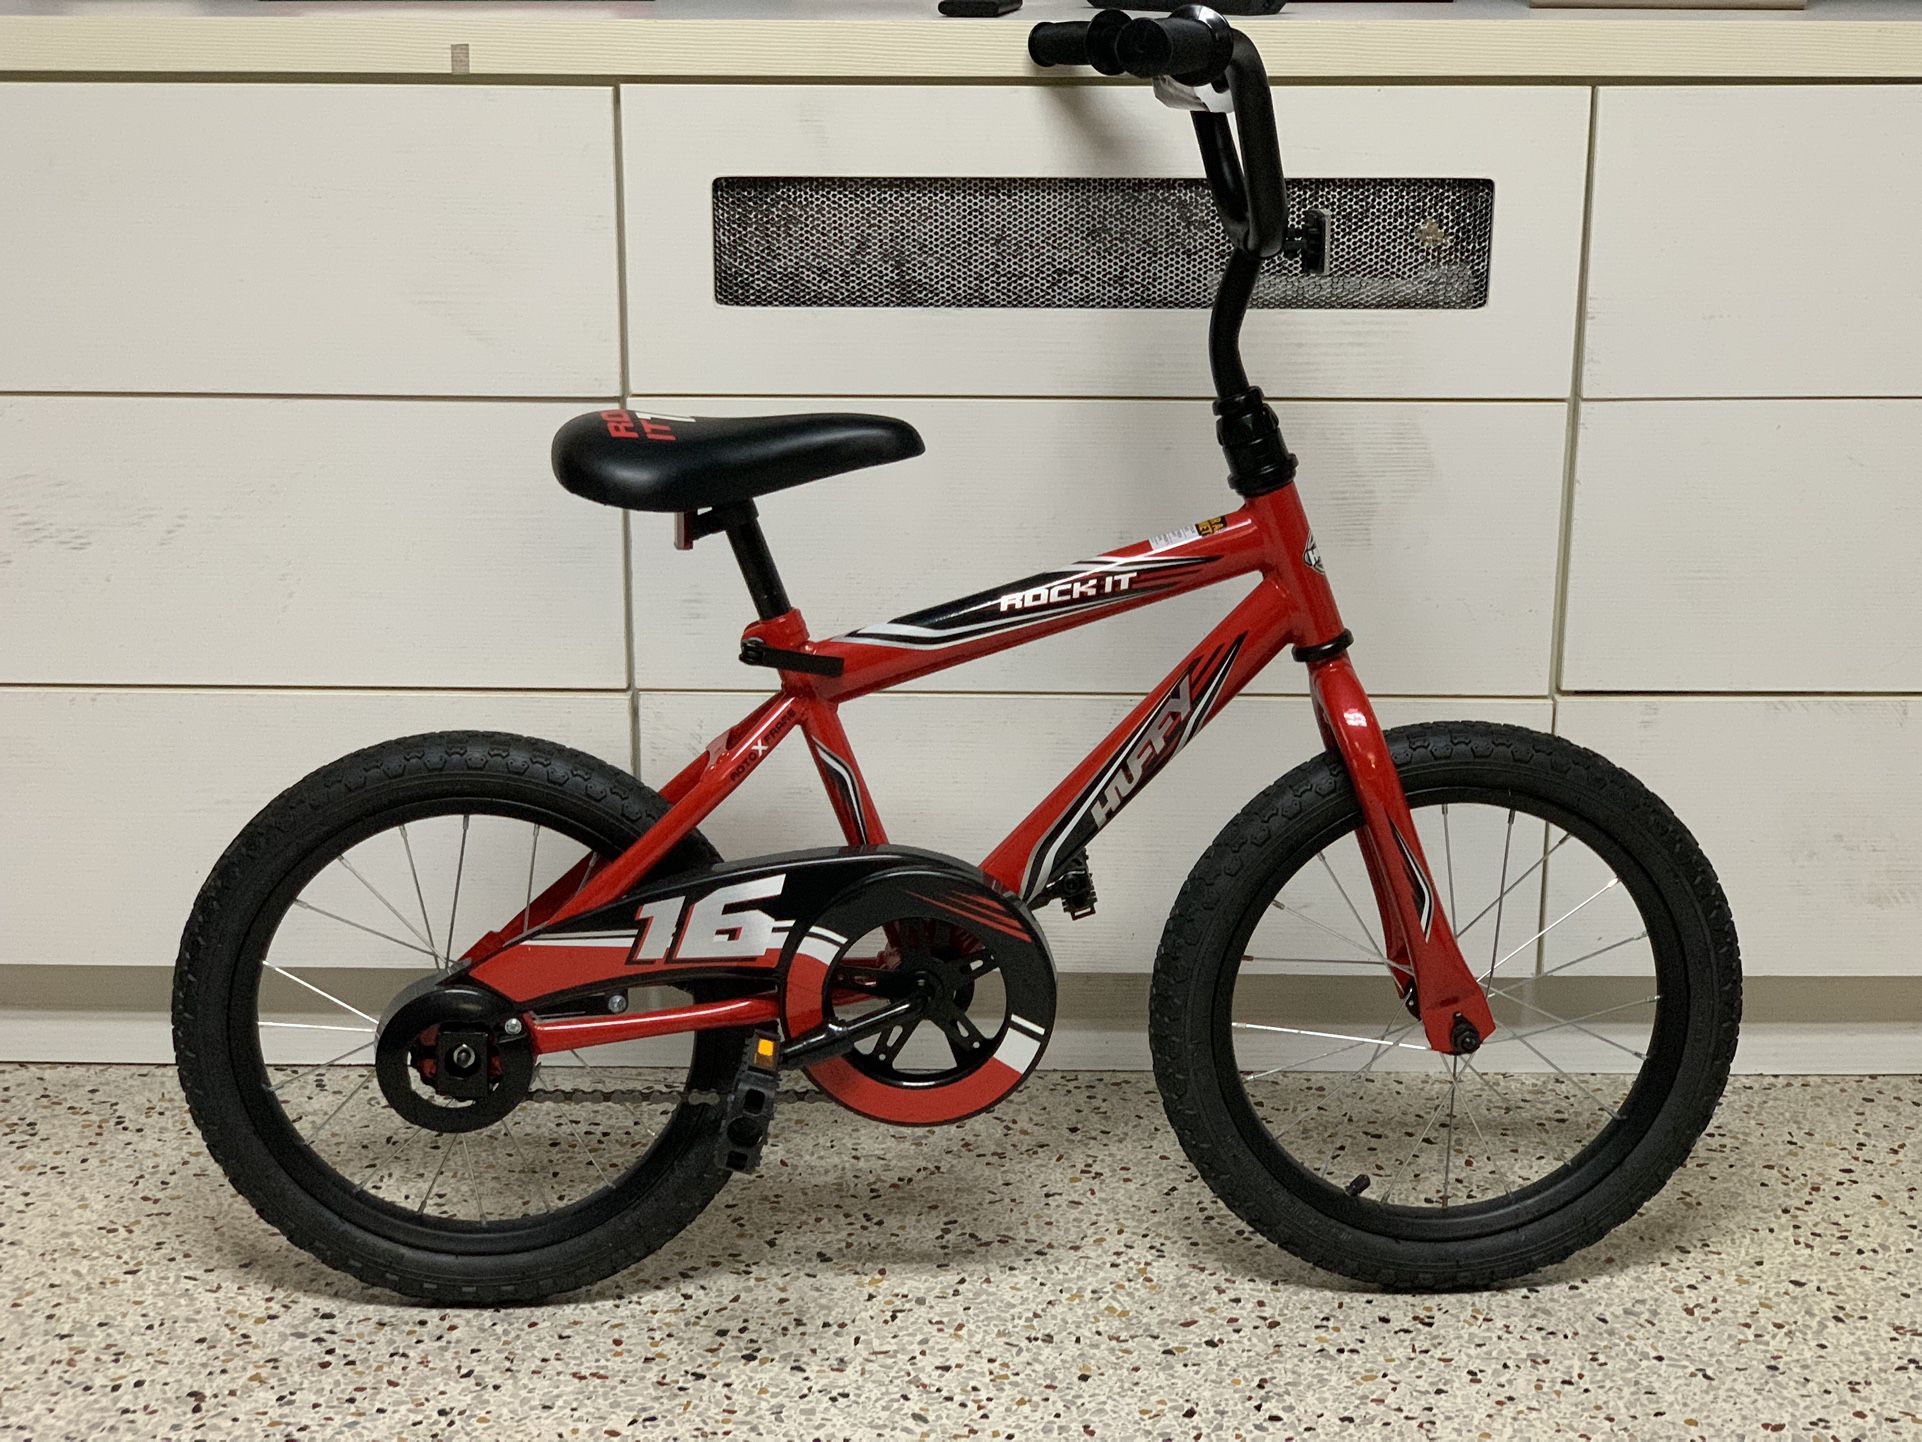 Huffy 16 in. Rock It Kids Bike for Boy Ages 4 and up. 